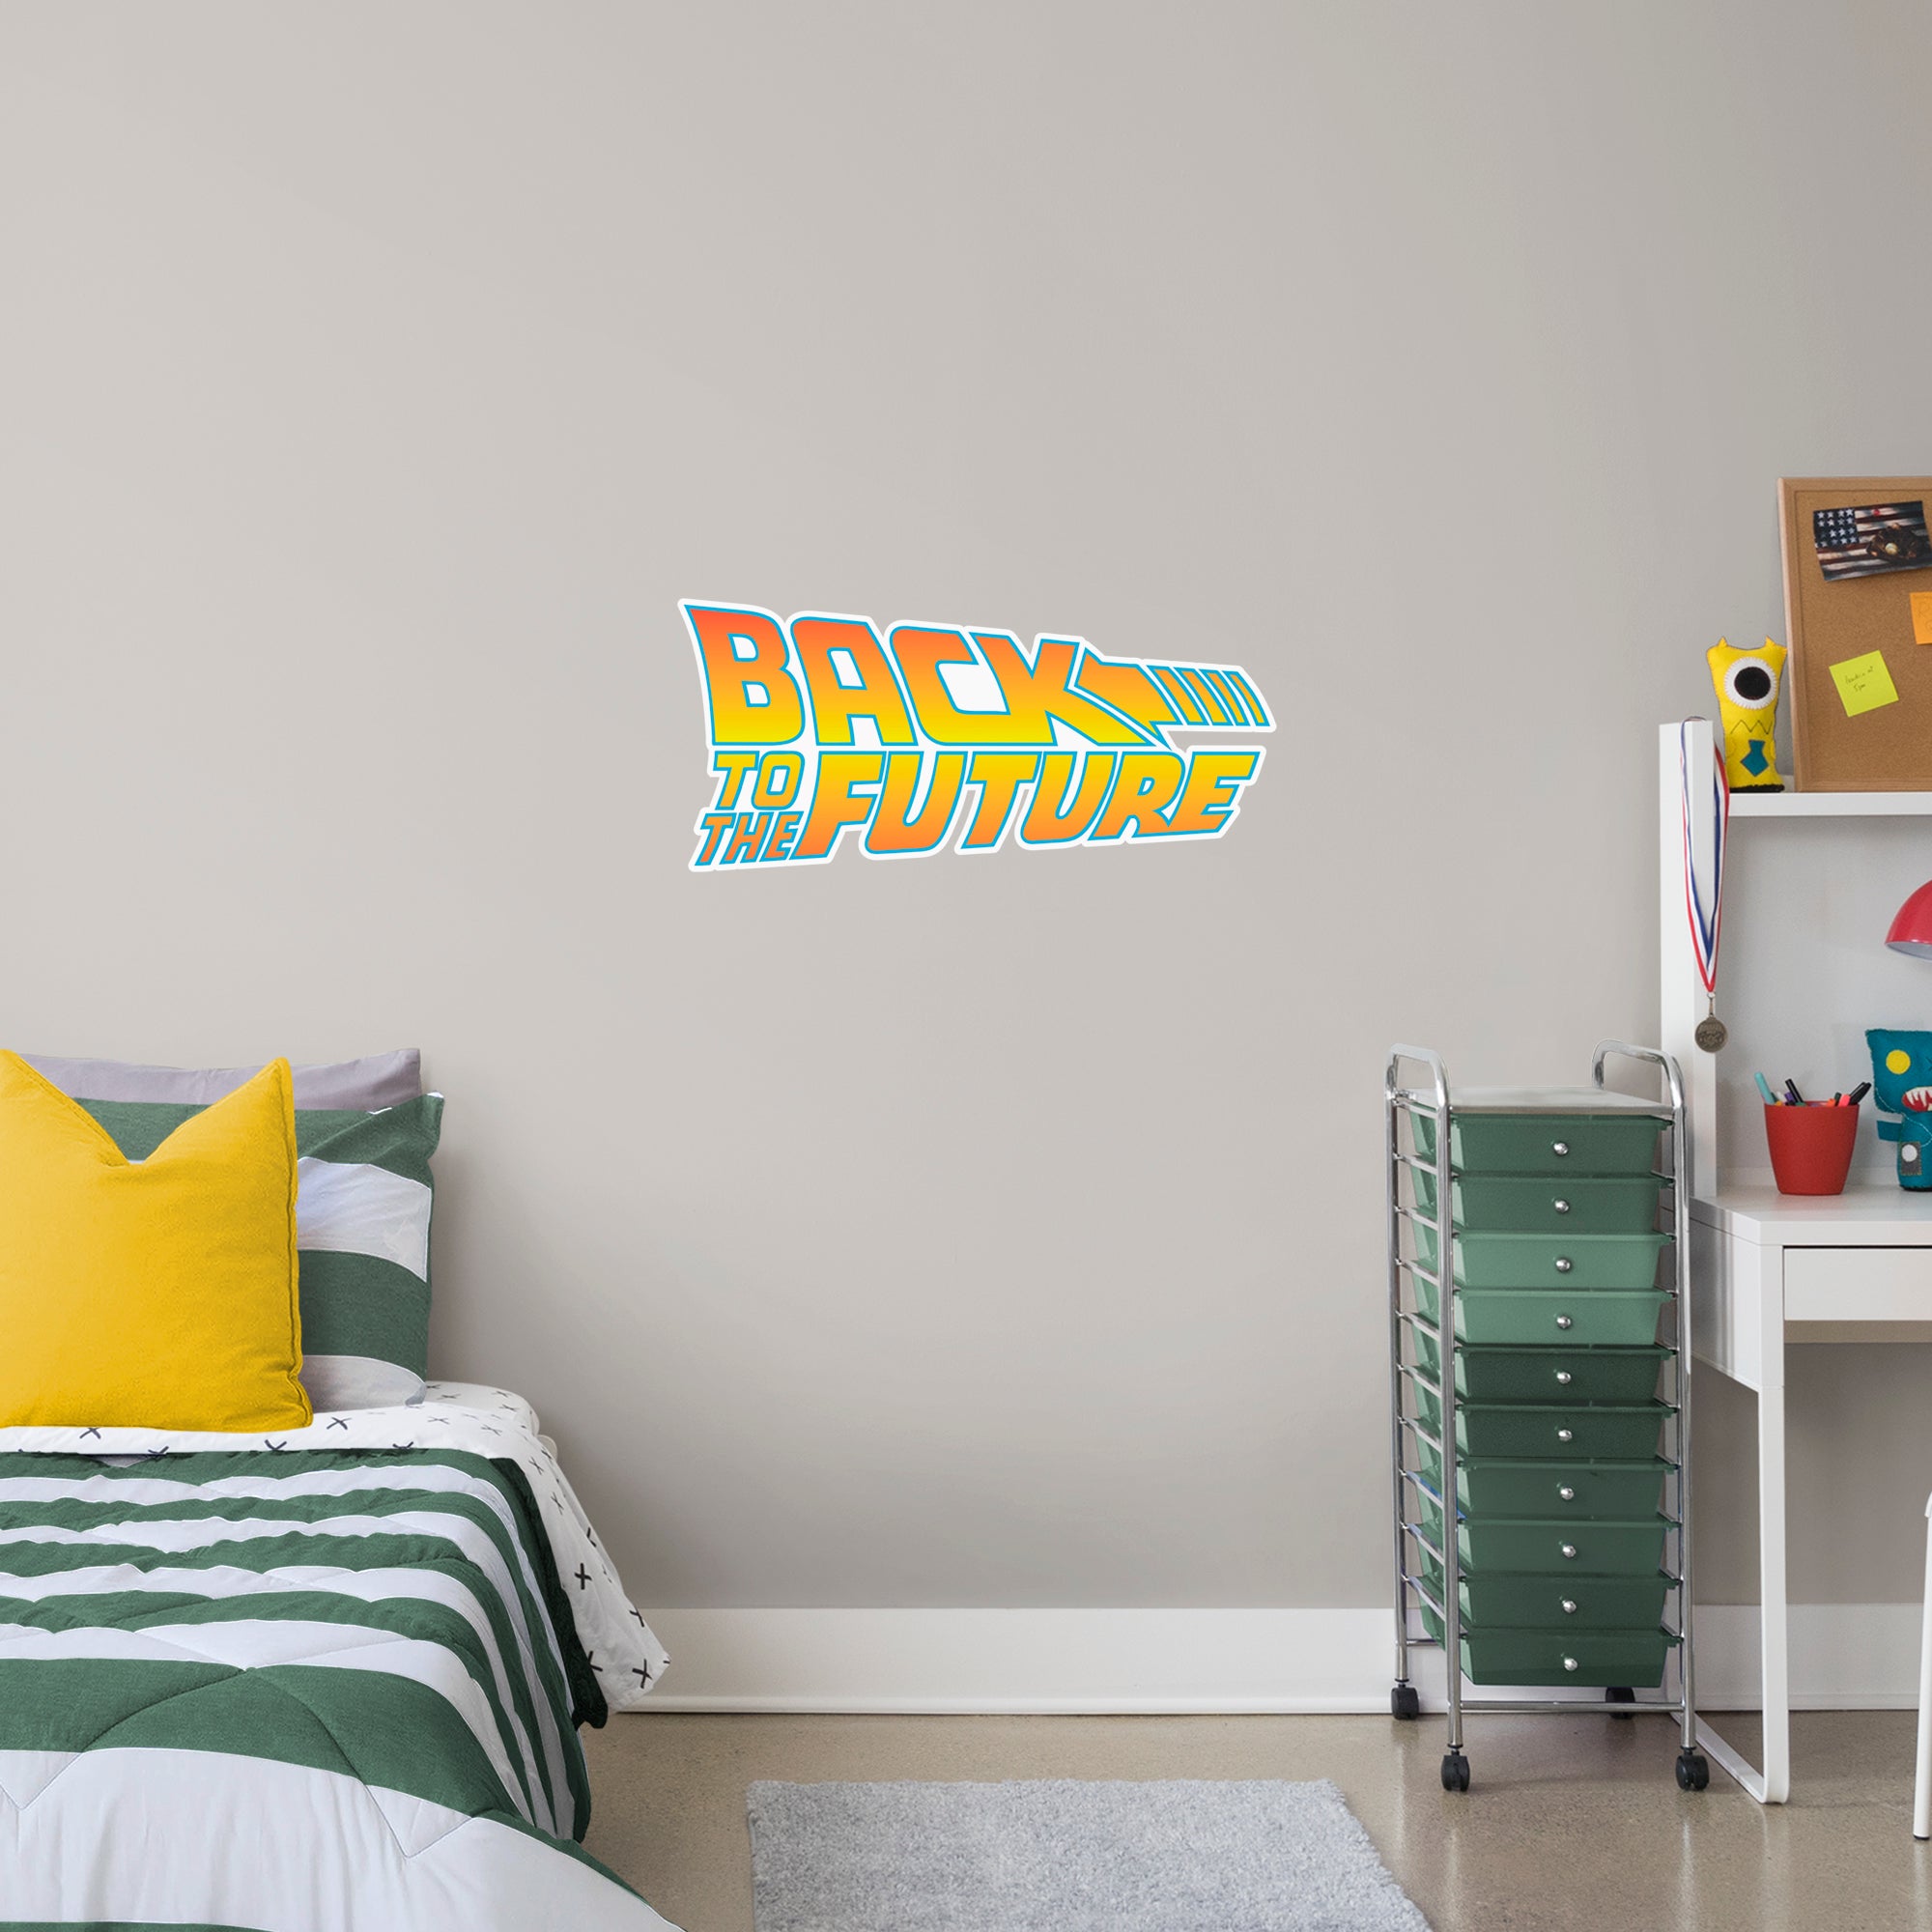 BACK TO THE FUTURE LOGO OFFICIALLY LICENSED NBC UNIVERSAL REMOVABLE Wall DECAL XL by Fathead | Vinyl